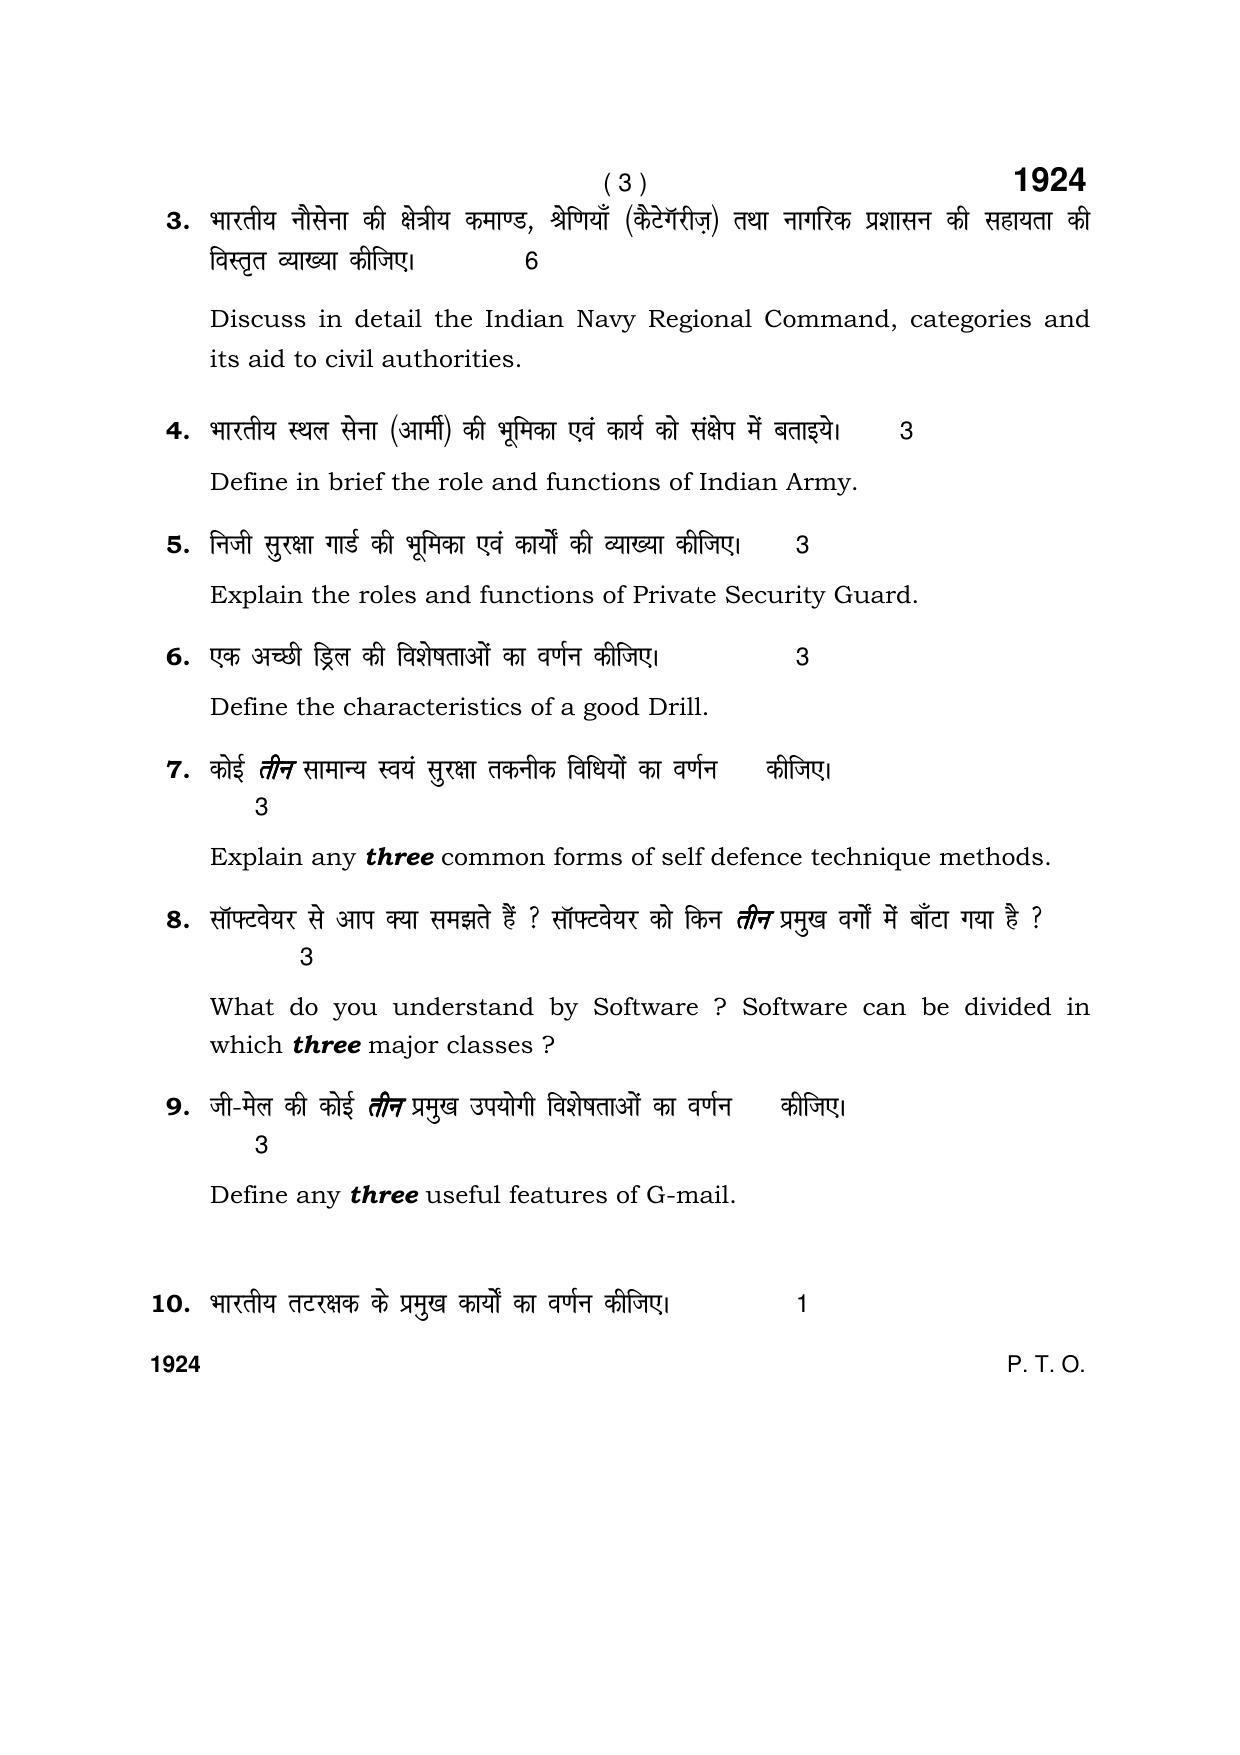 Haryana Board HBSE Class 10 Security 2017 Question Paper - Page 3